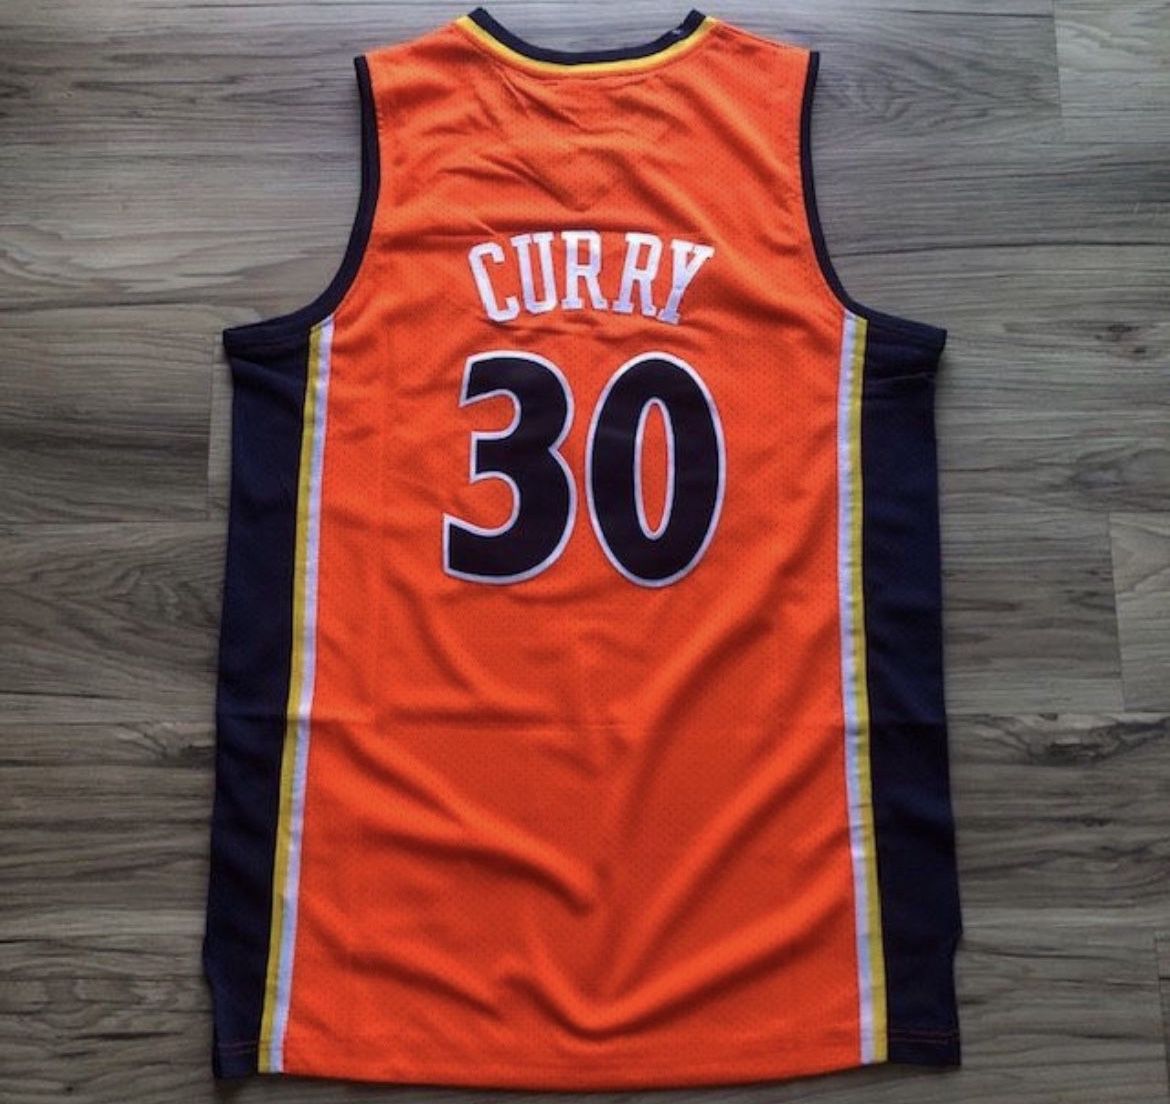 new steph curry jersey